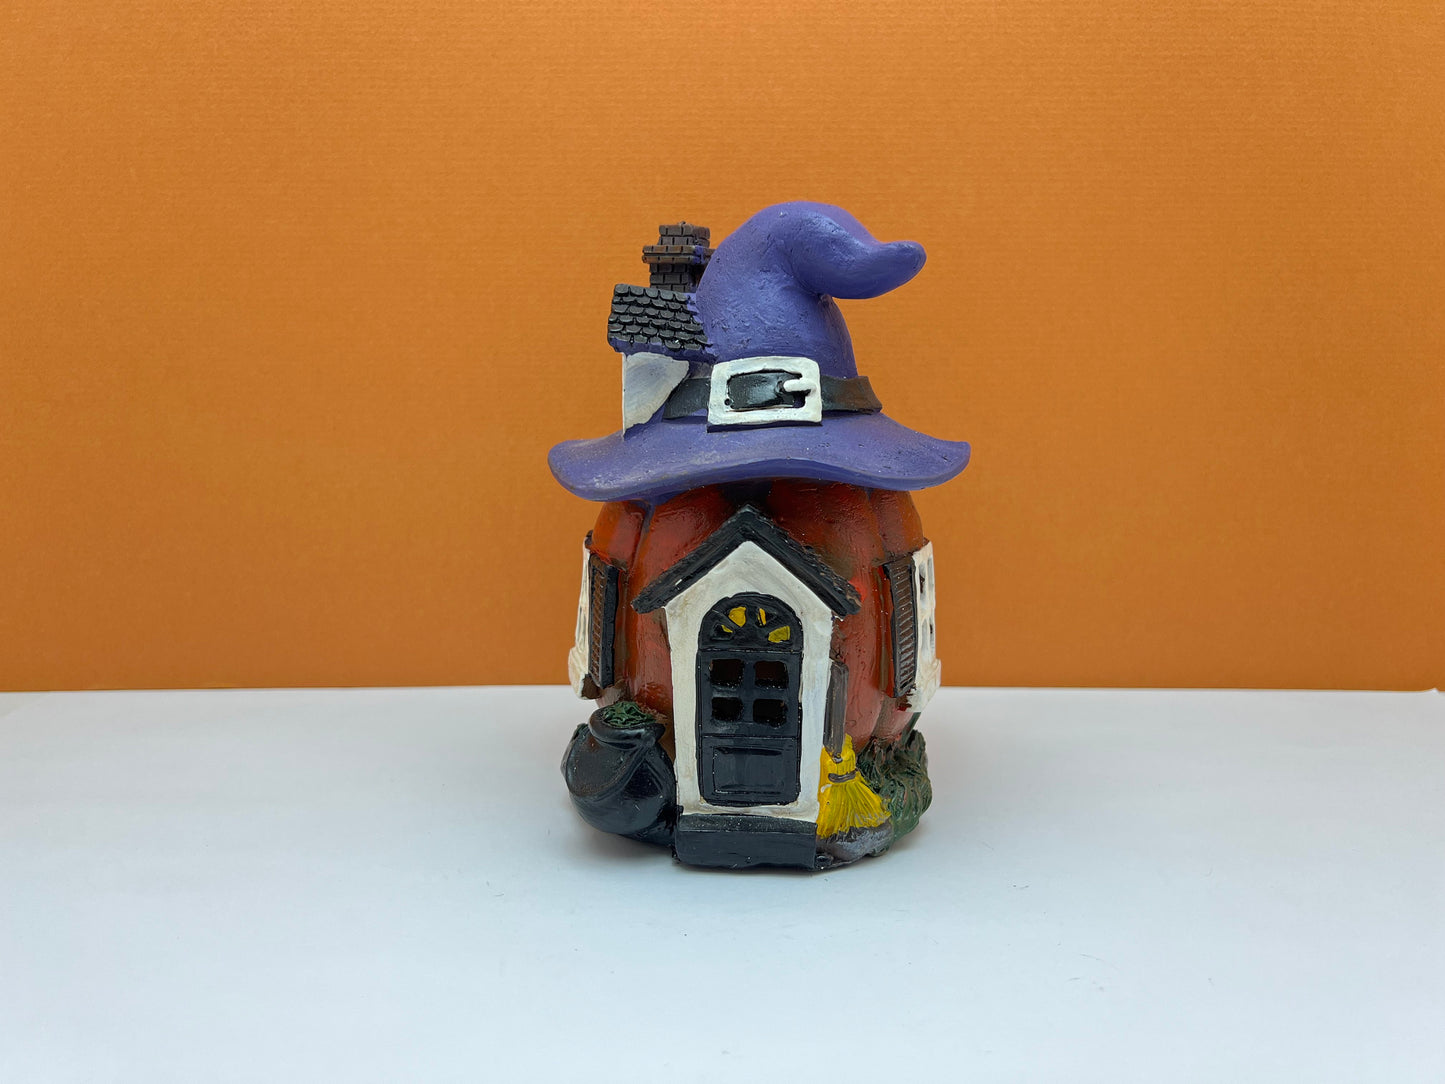 LED Witches Hat Pumpkin House Halloween